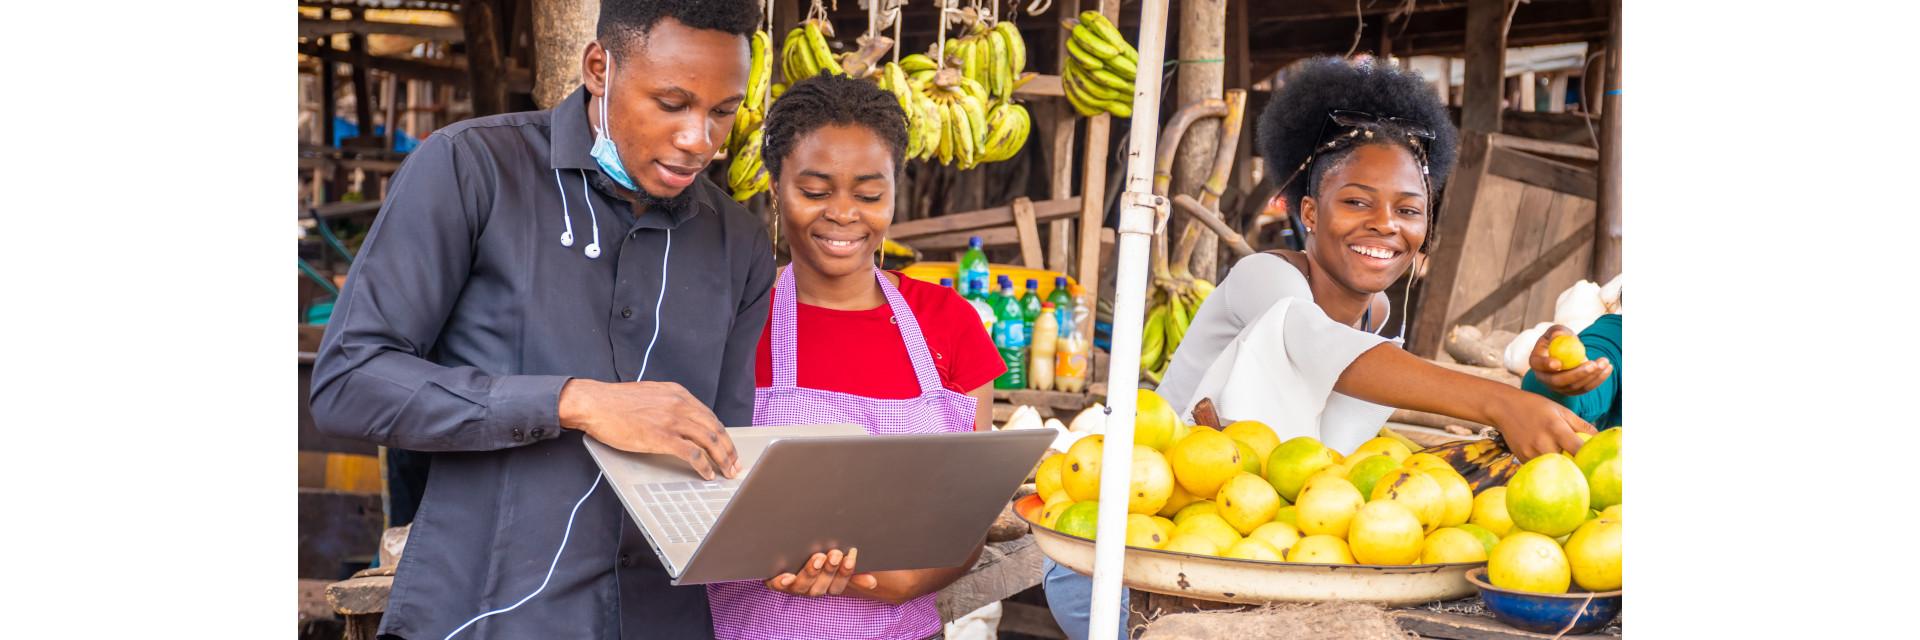 The AfCFTA, an opportunity for Africa’s youth to accelerate trade and industrialization